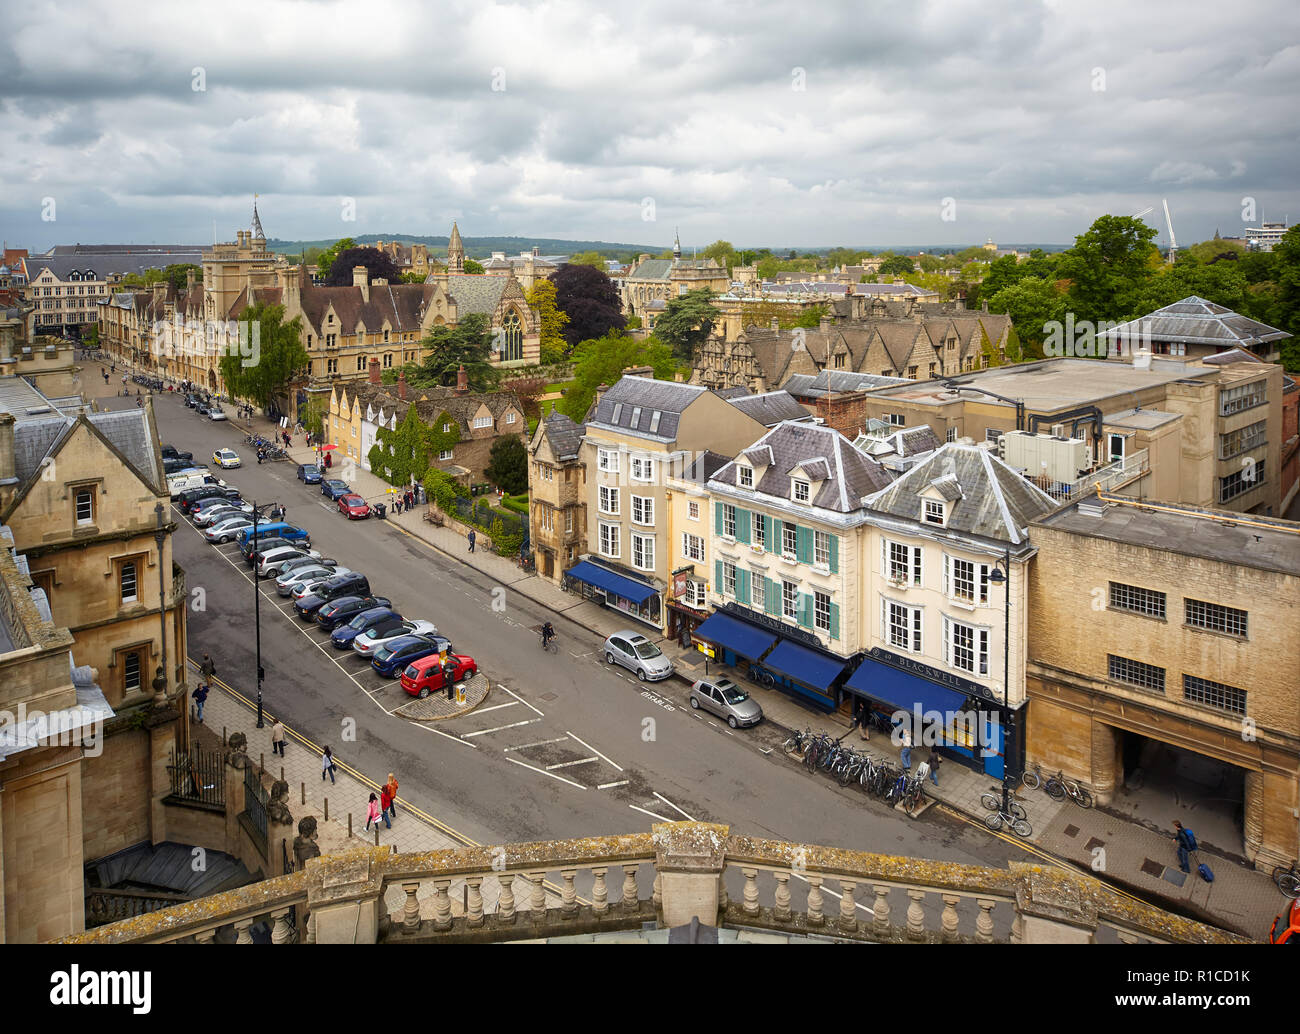 OXFORD, ENGLAND - MAY 15, 2009: The view from the cupola of Sheldonian Theatre to the Broad street. Oxford University. England Stock Photo